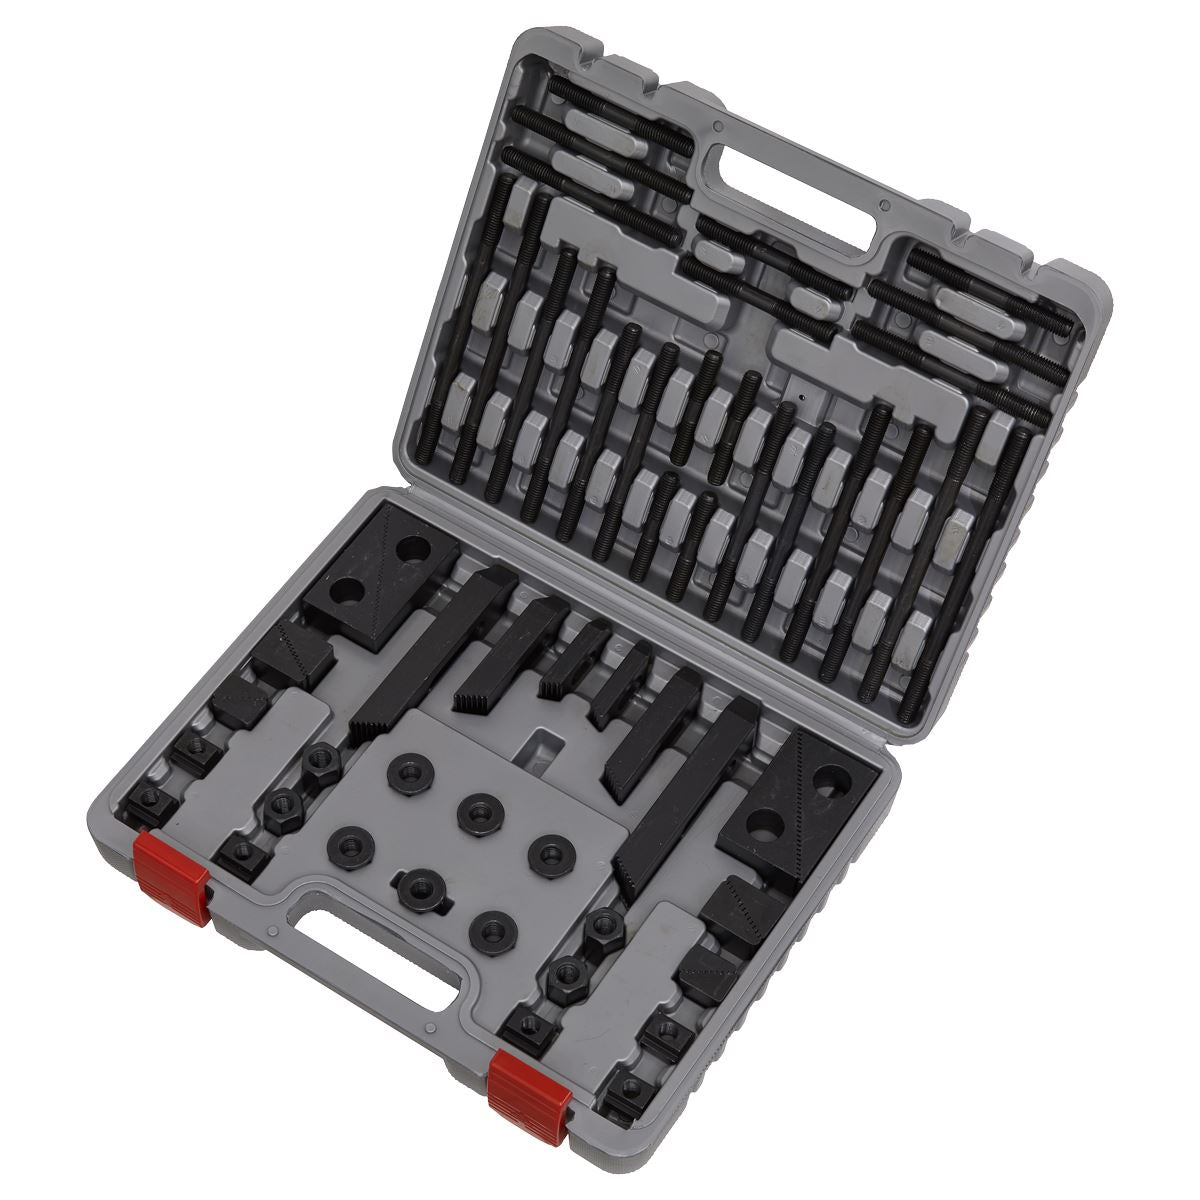 Sealey Clamping Kit 58pc